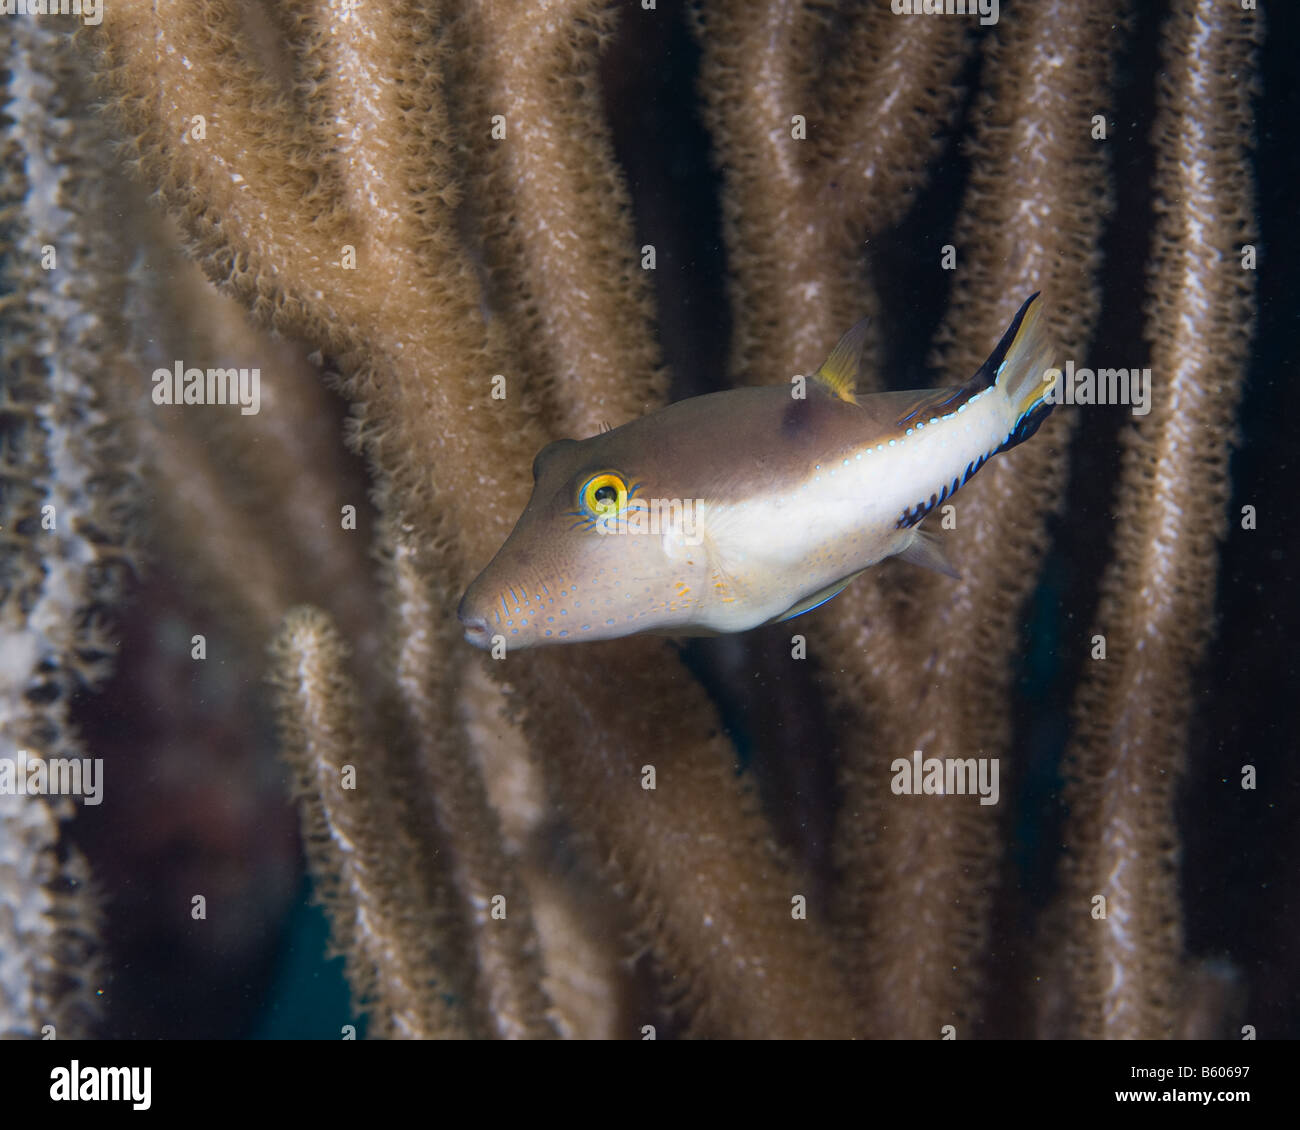 A small Sharpnose Puffer fish swims down in front of some coral stalks. Stock Photo